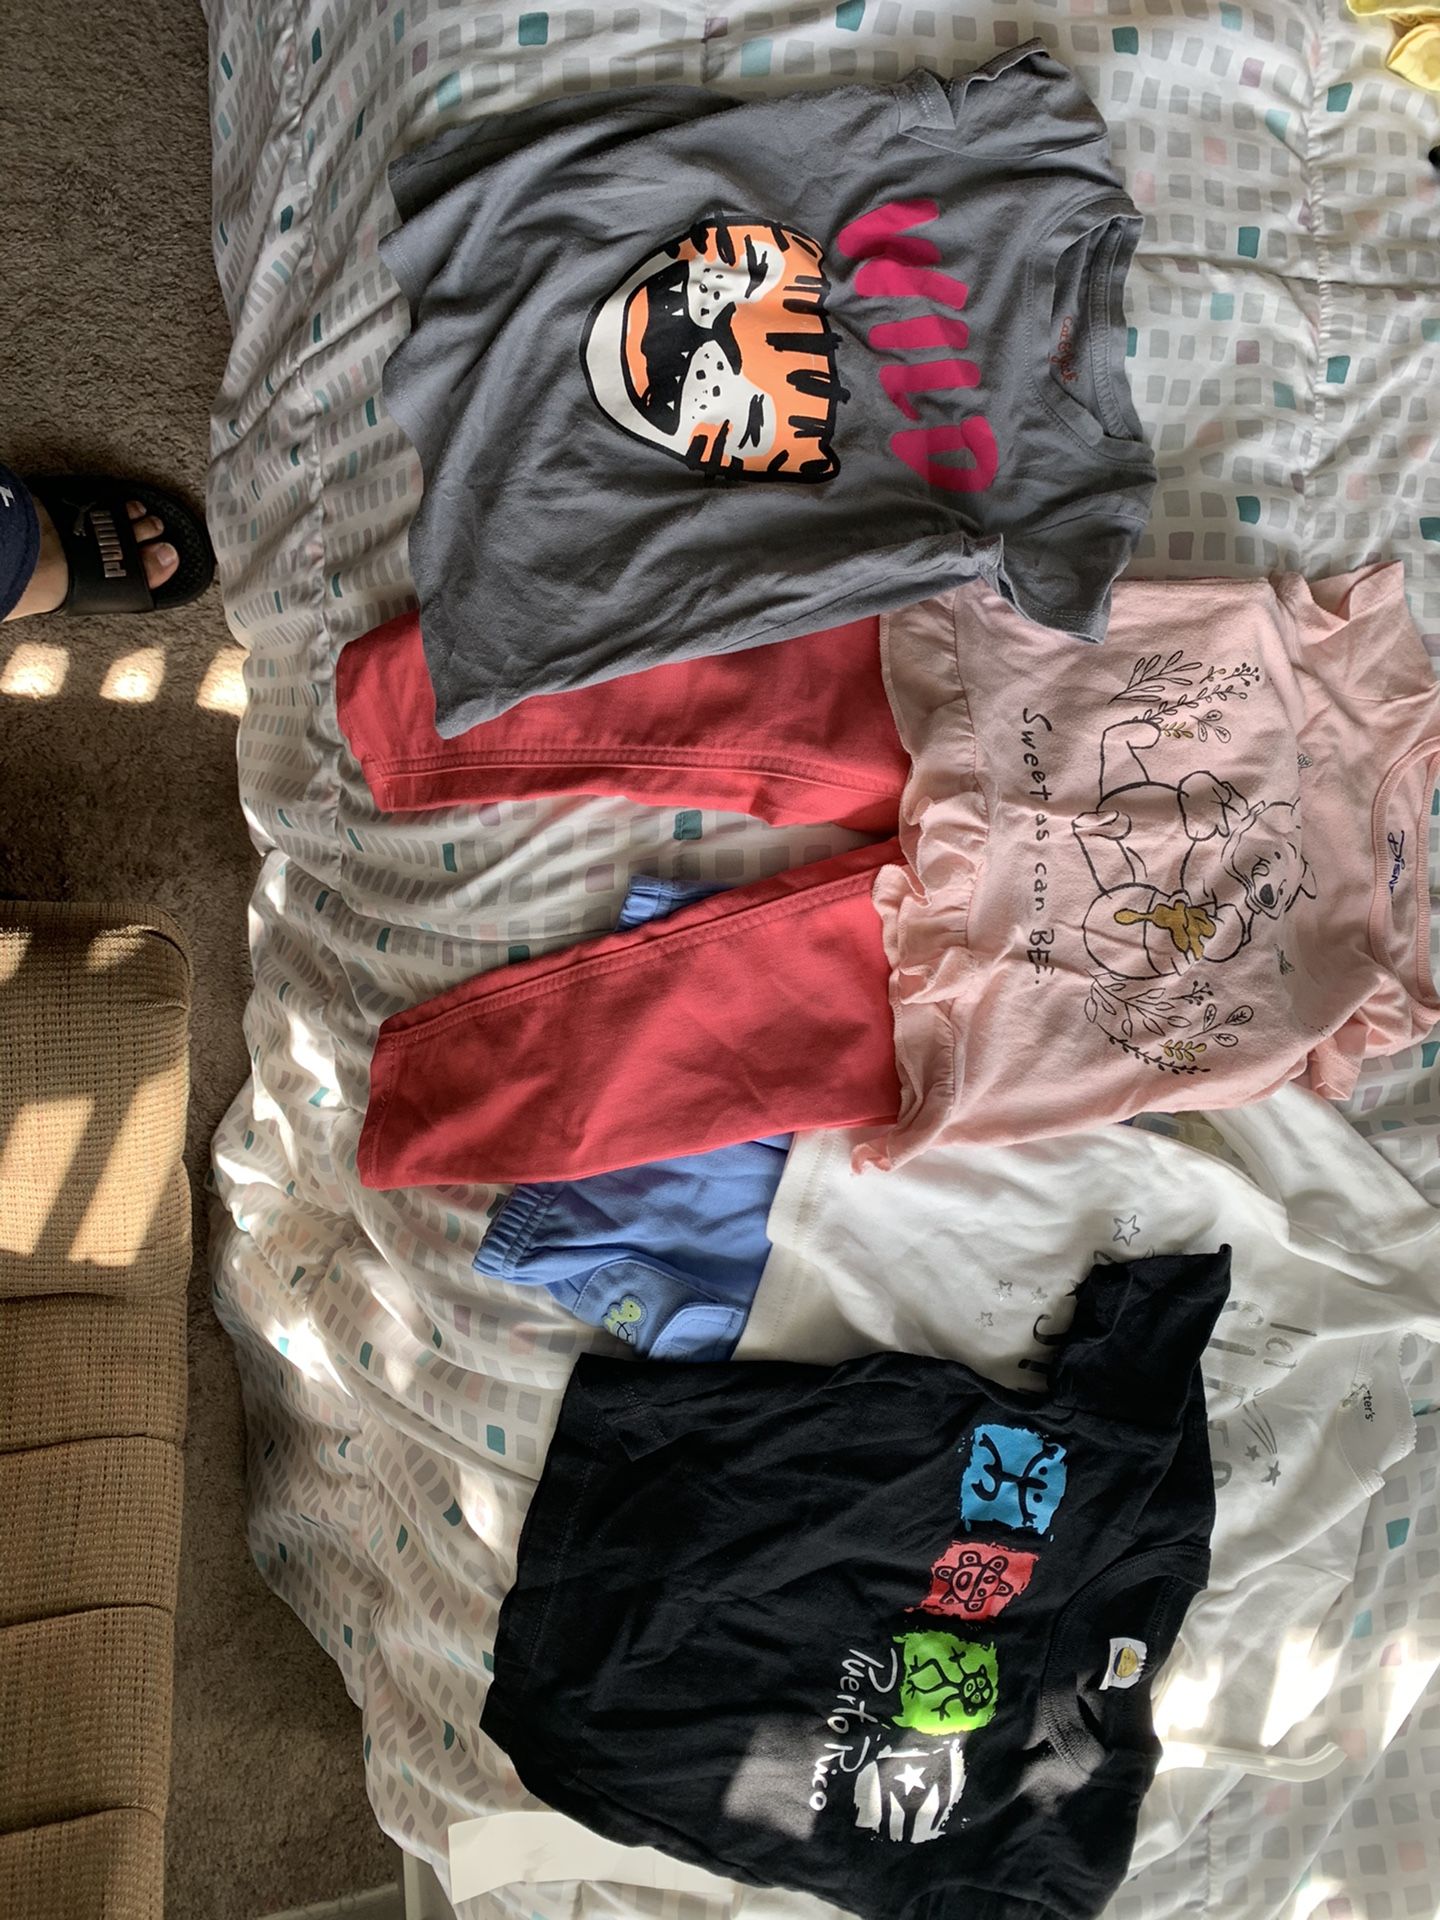 2-4 yr old Kids Clothes